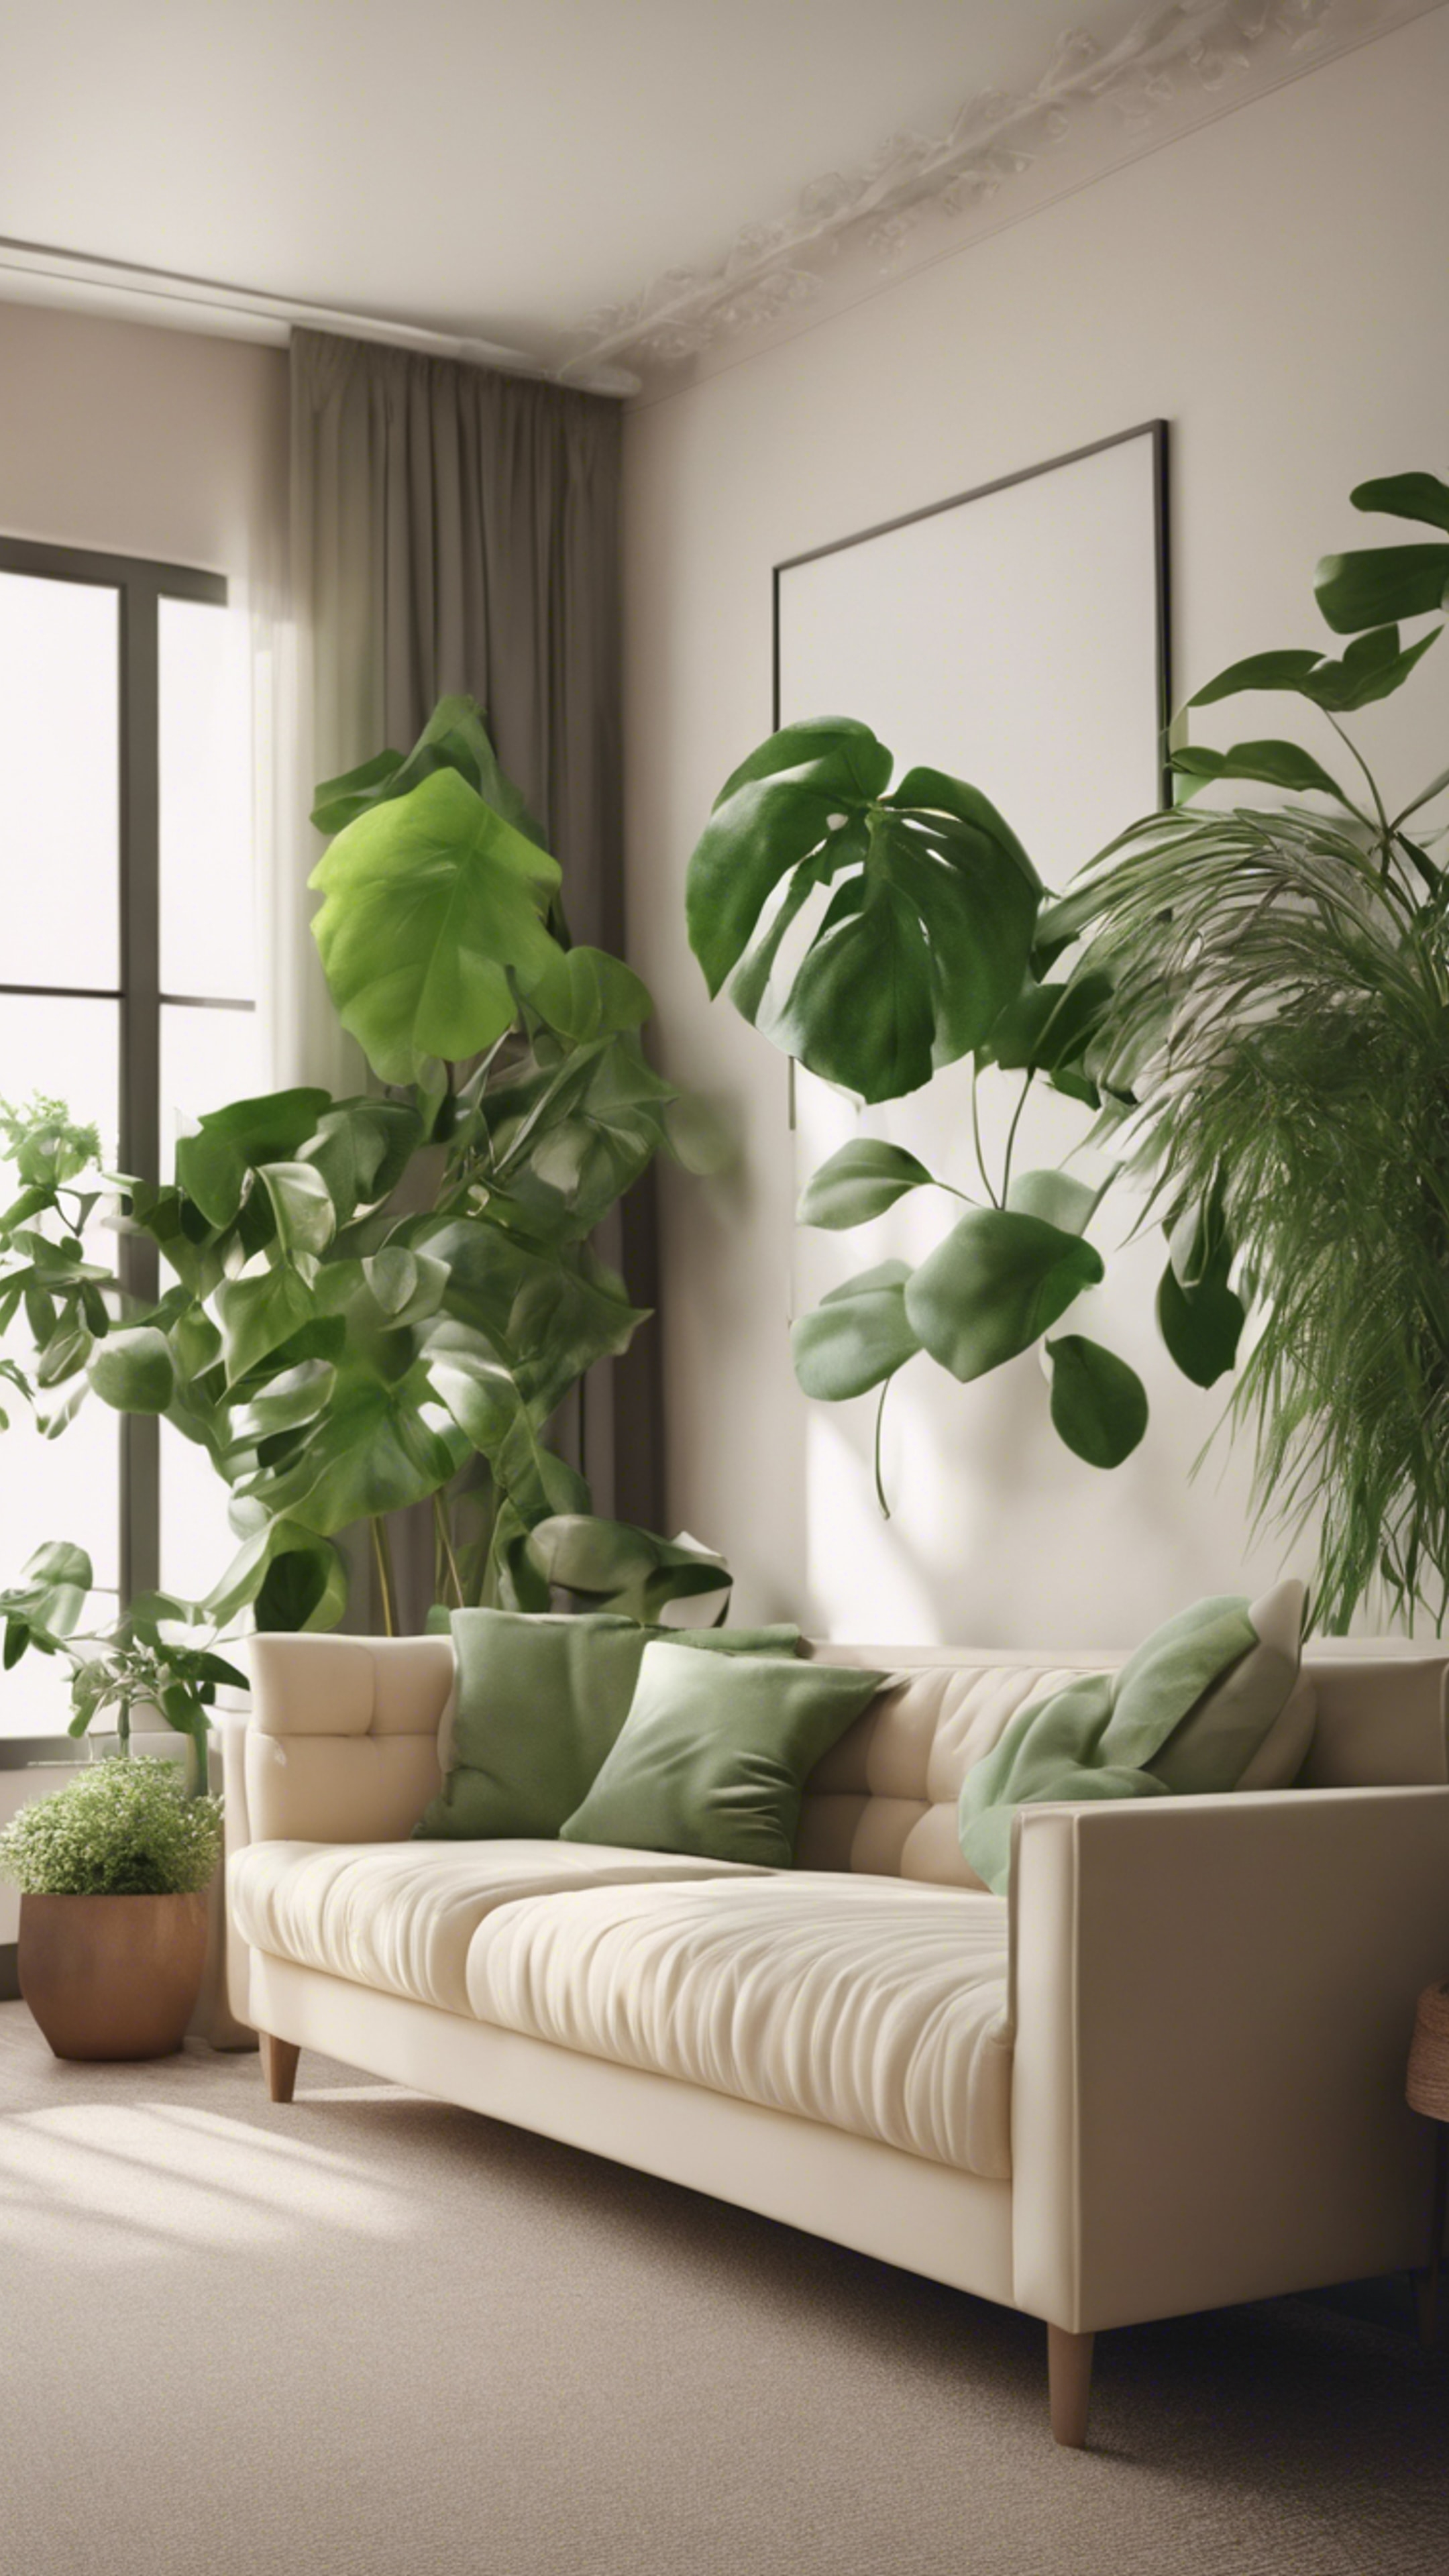 A simplistic living room featuring a cream couch contrasted with a natural green aesthetic of indoor plants 牆紙[57c4f329650745189cc4]